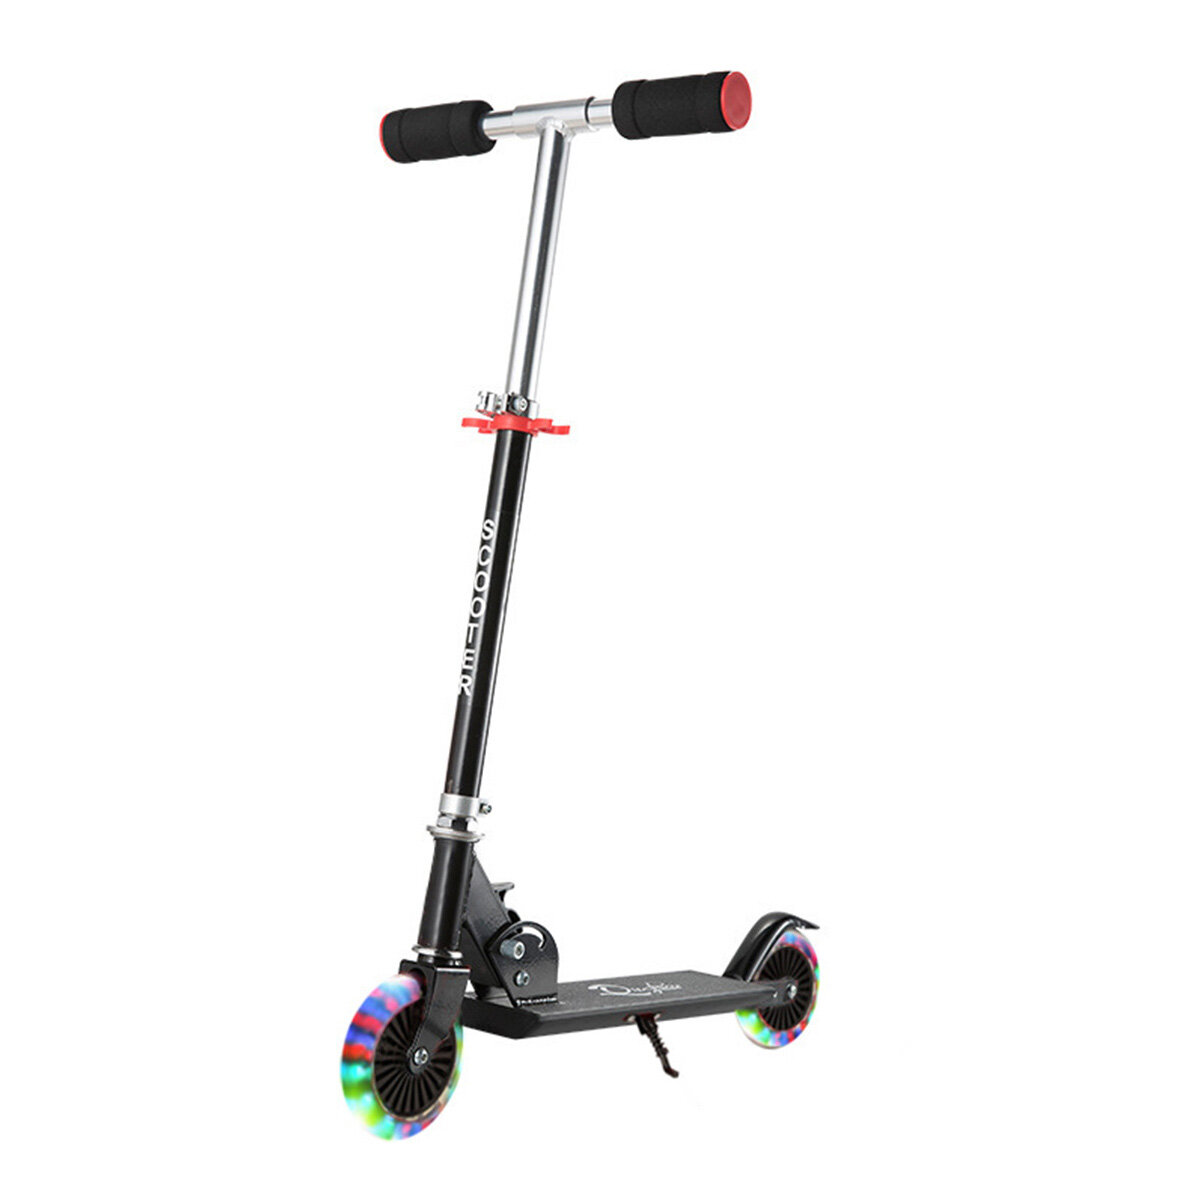 Kids Scooter LED Flashing Wheel Adjustable Height Kick Scooter Children Toddlers for 3-6 Years Old